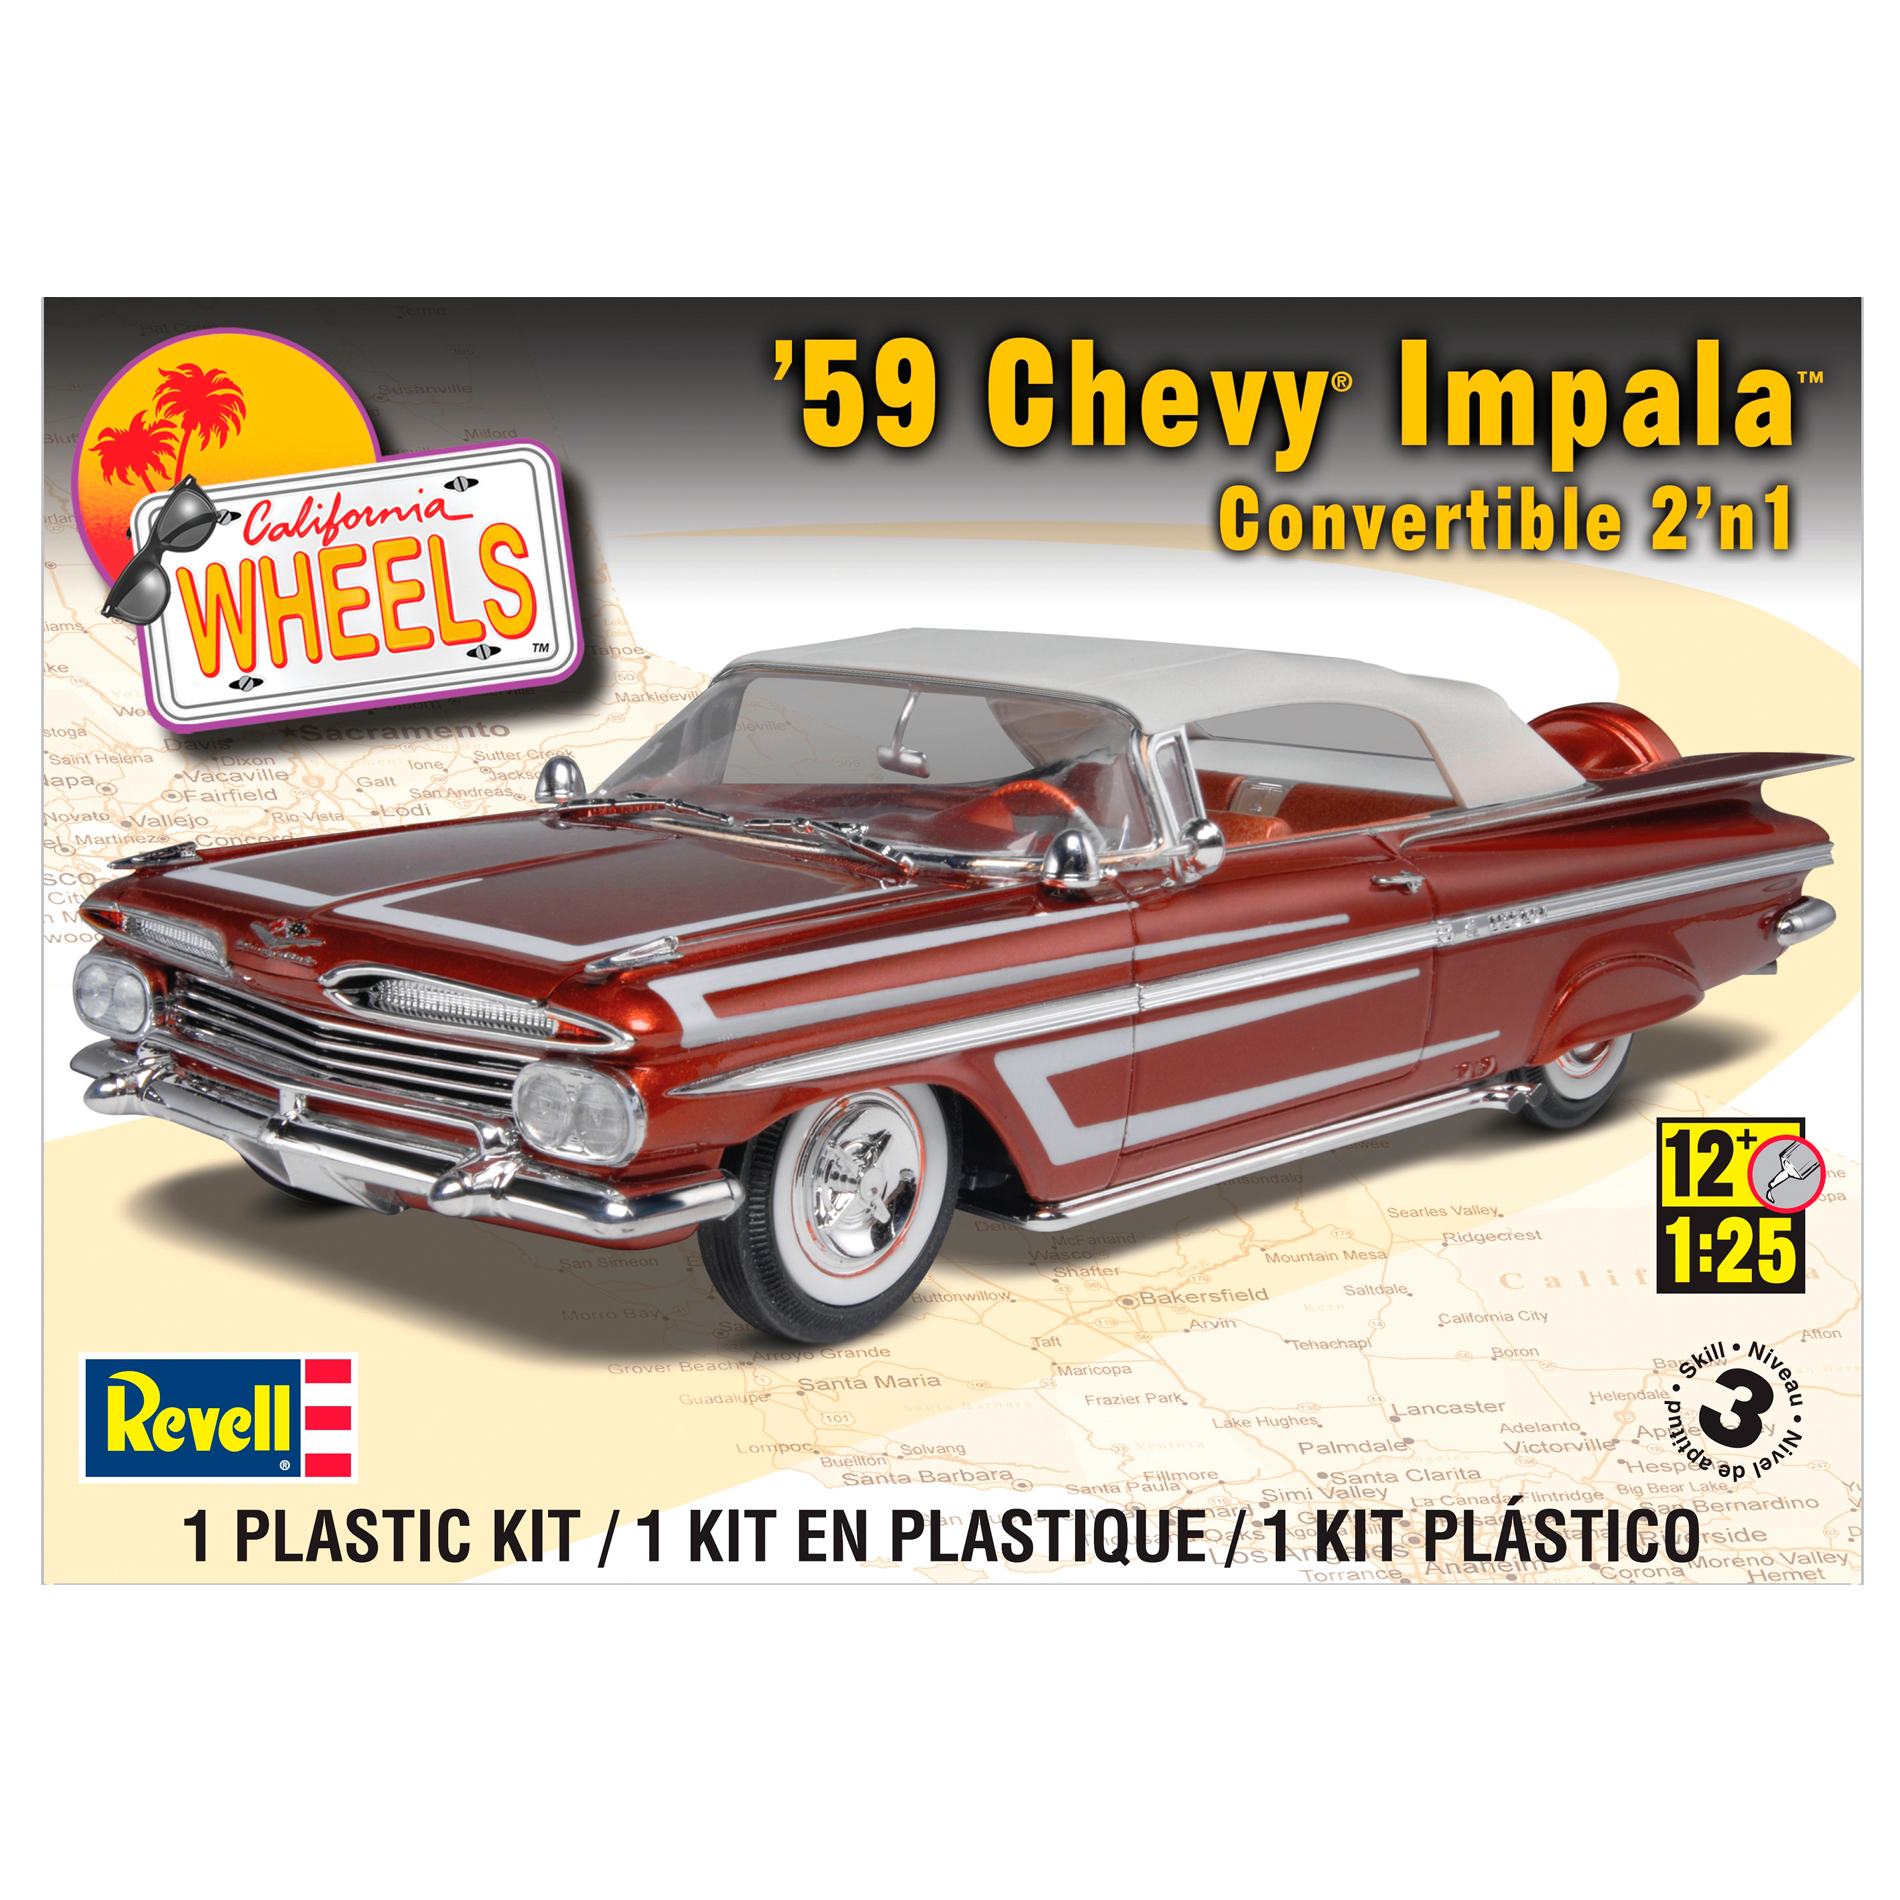 1:25 Scale 1959 Chevy Impala Convertible 2 -in-1 Plastic Model Kit